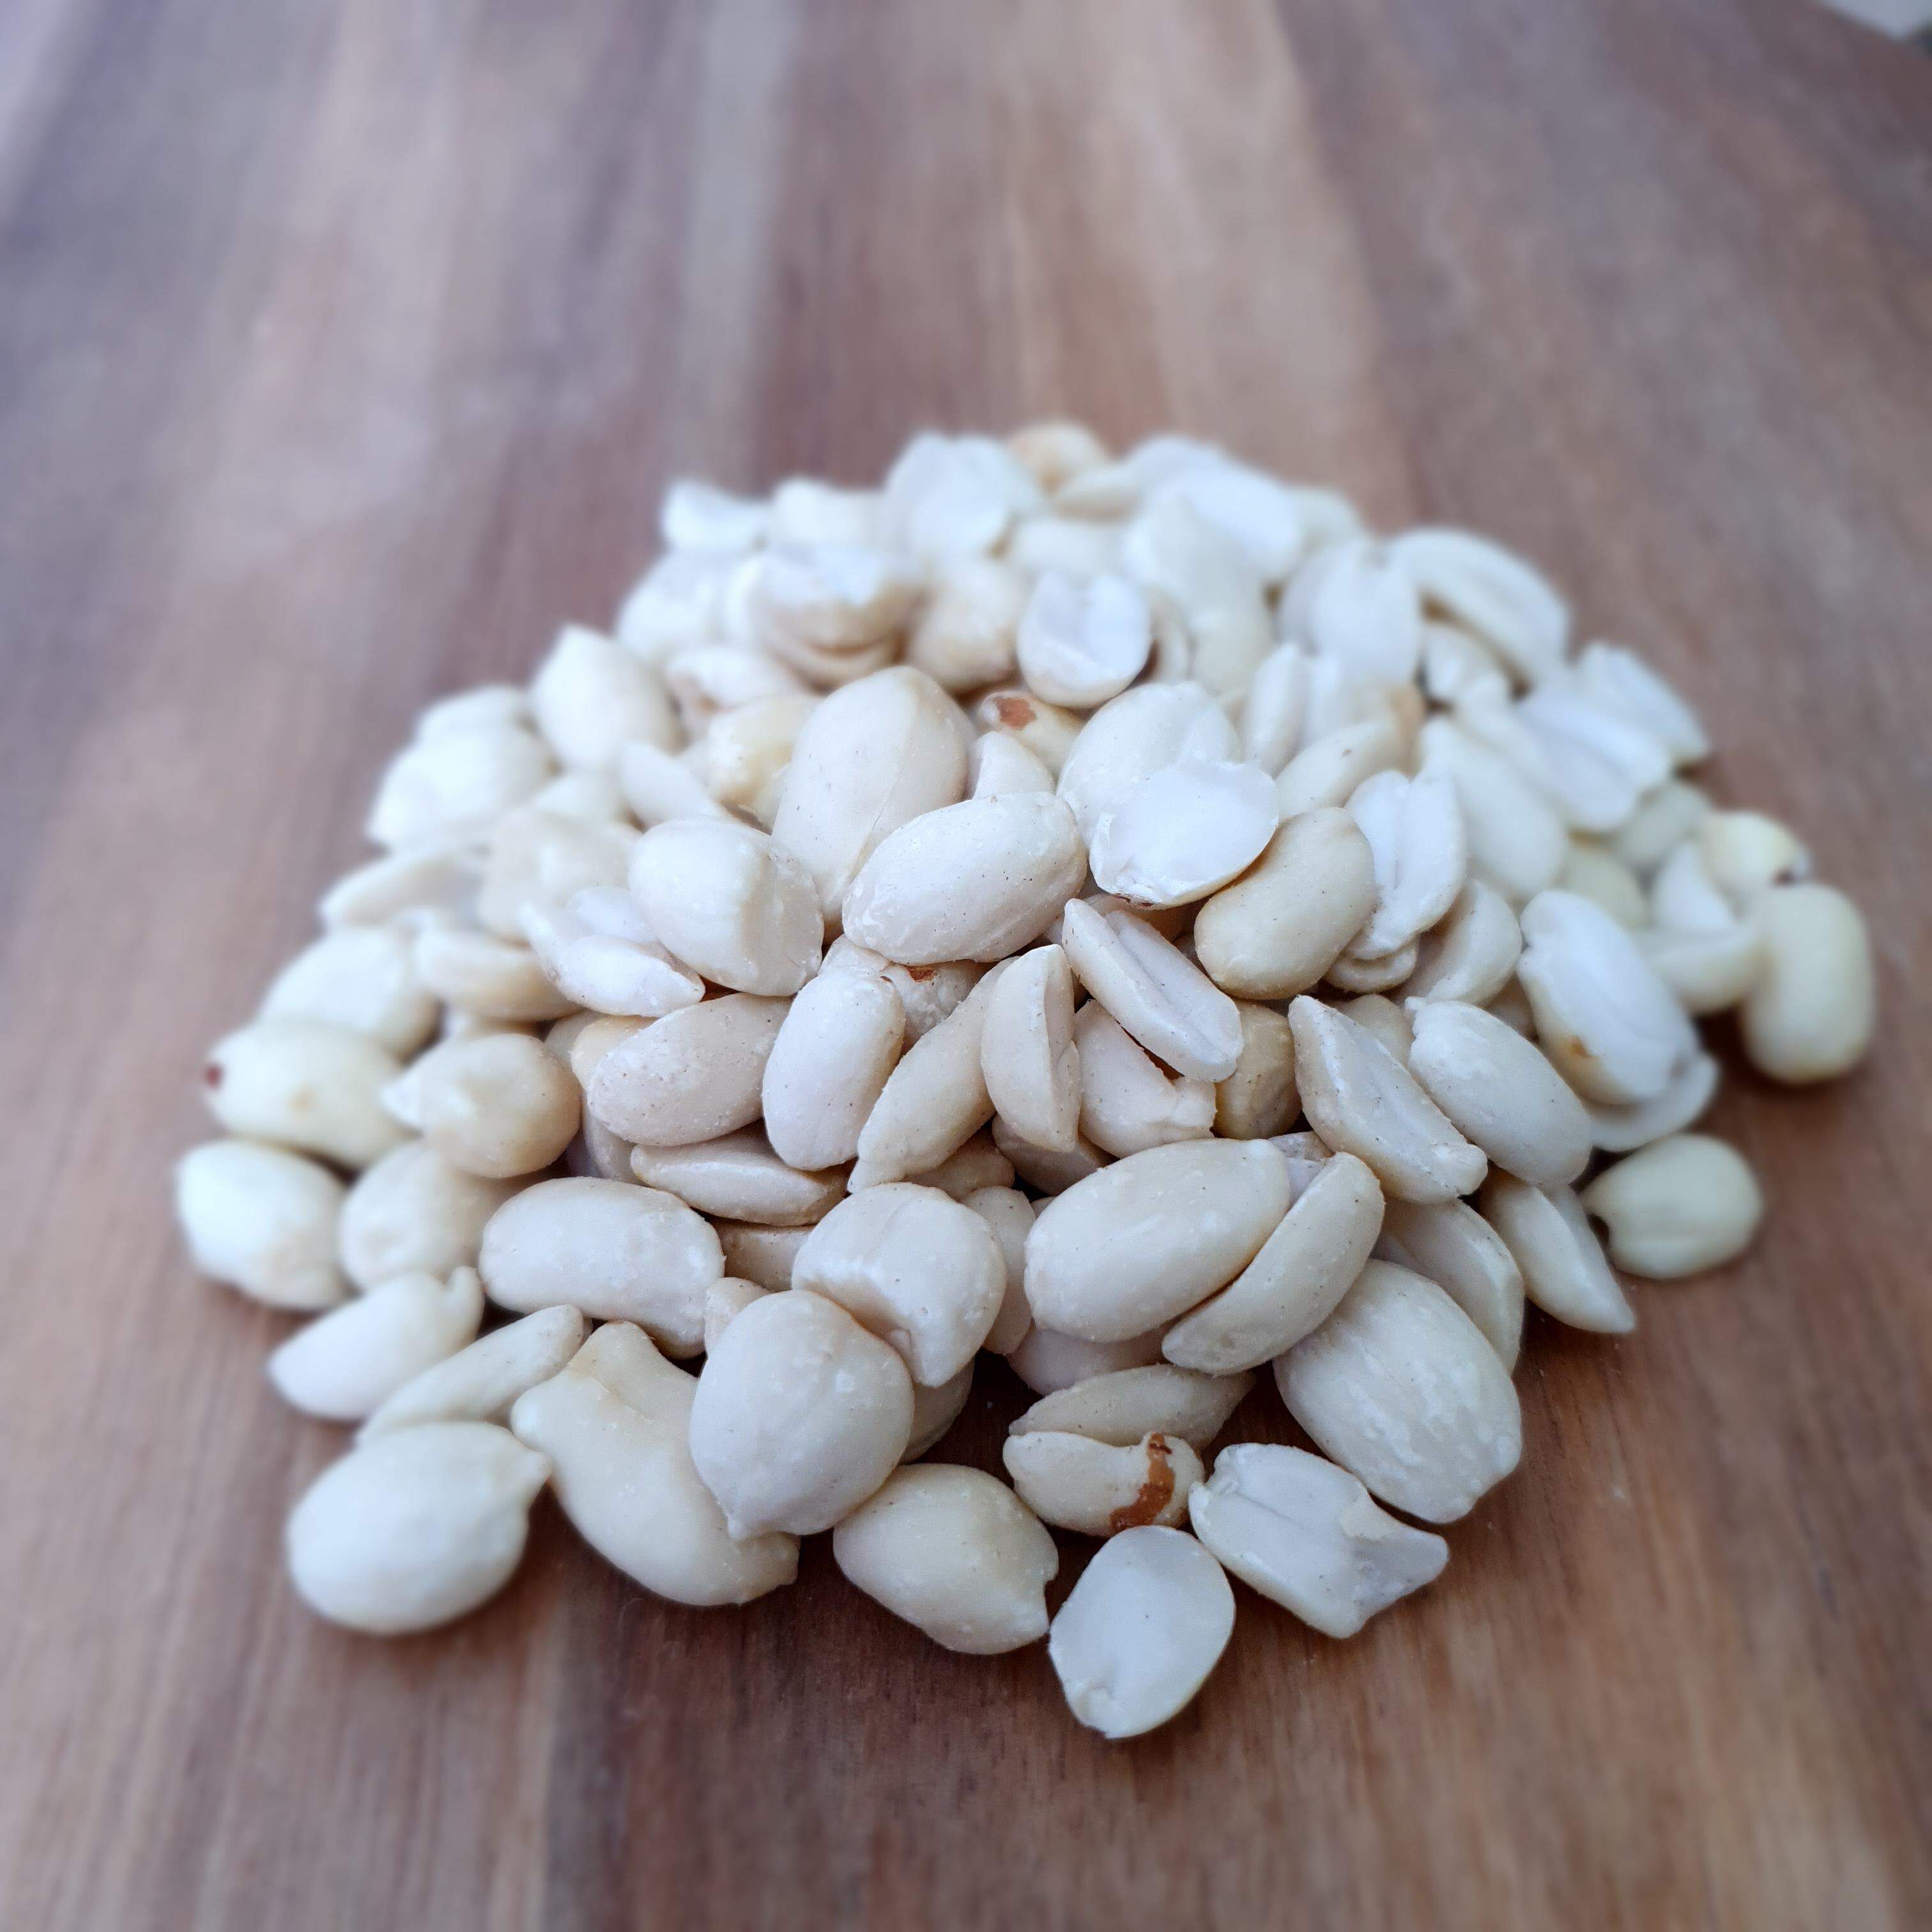 PEANUTS BLANCHED RAW 1kg